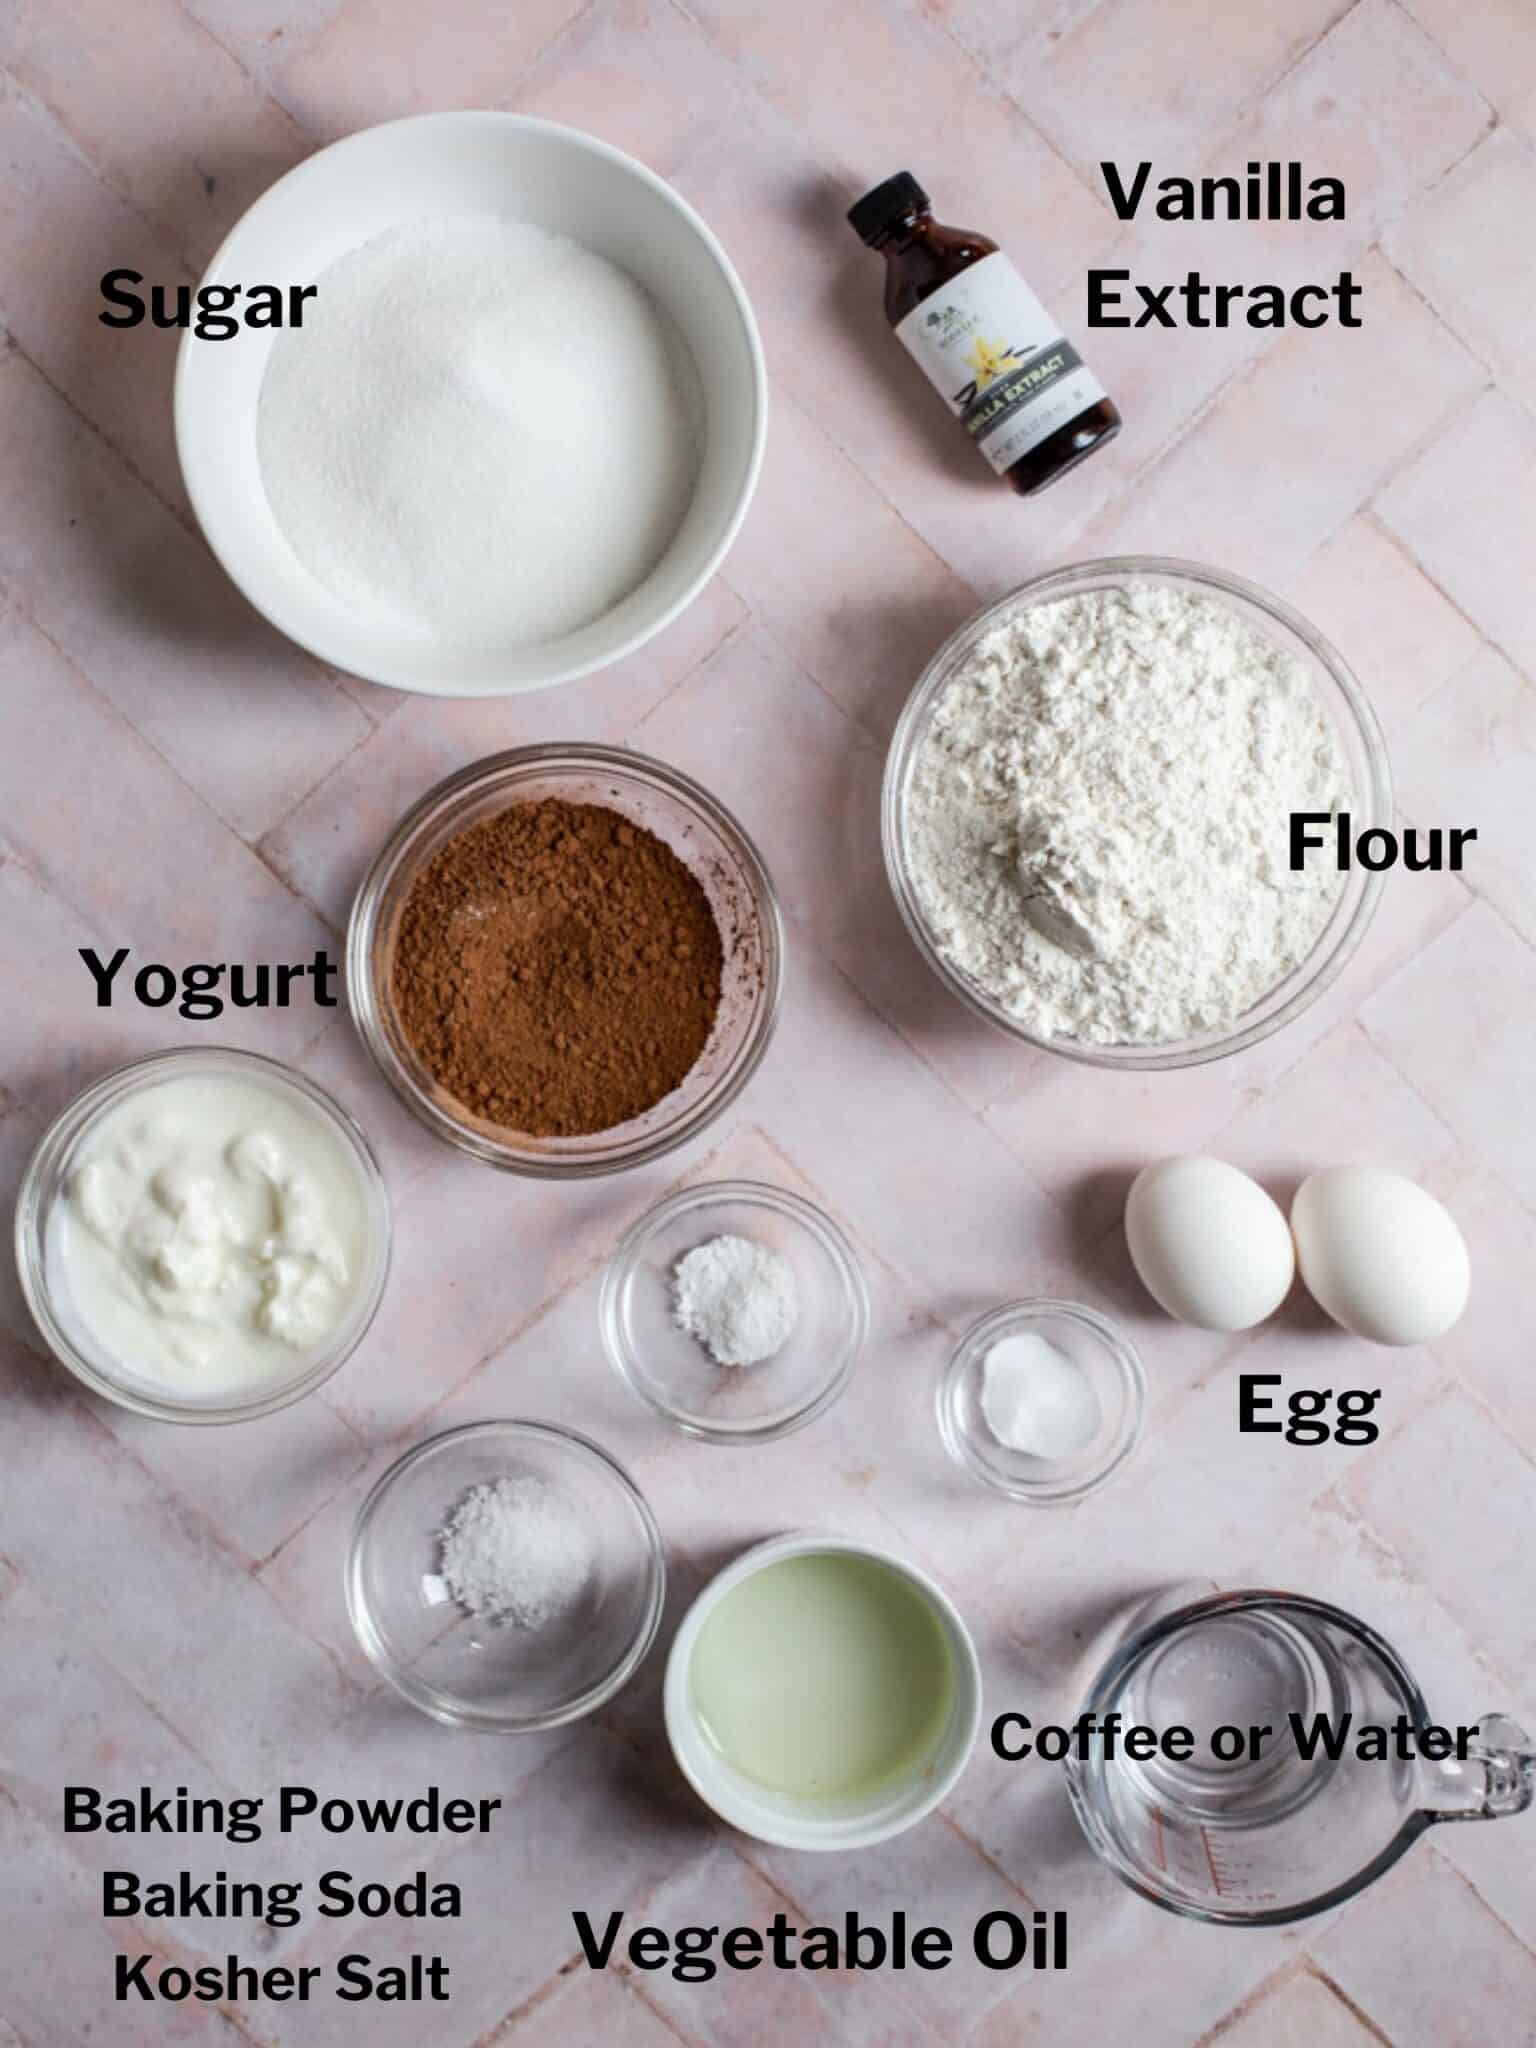 Ingredients for the cupcakes